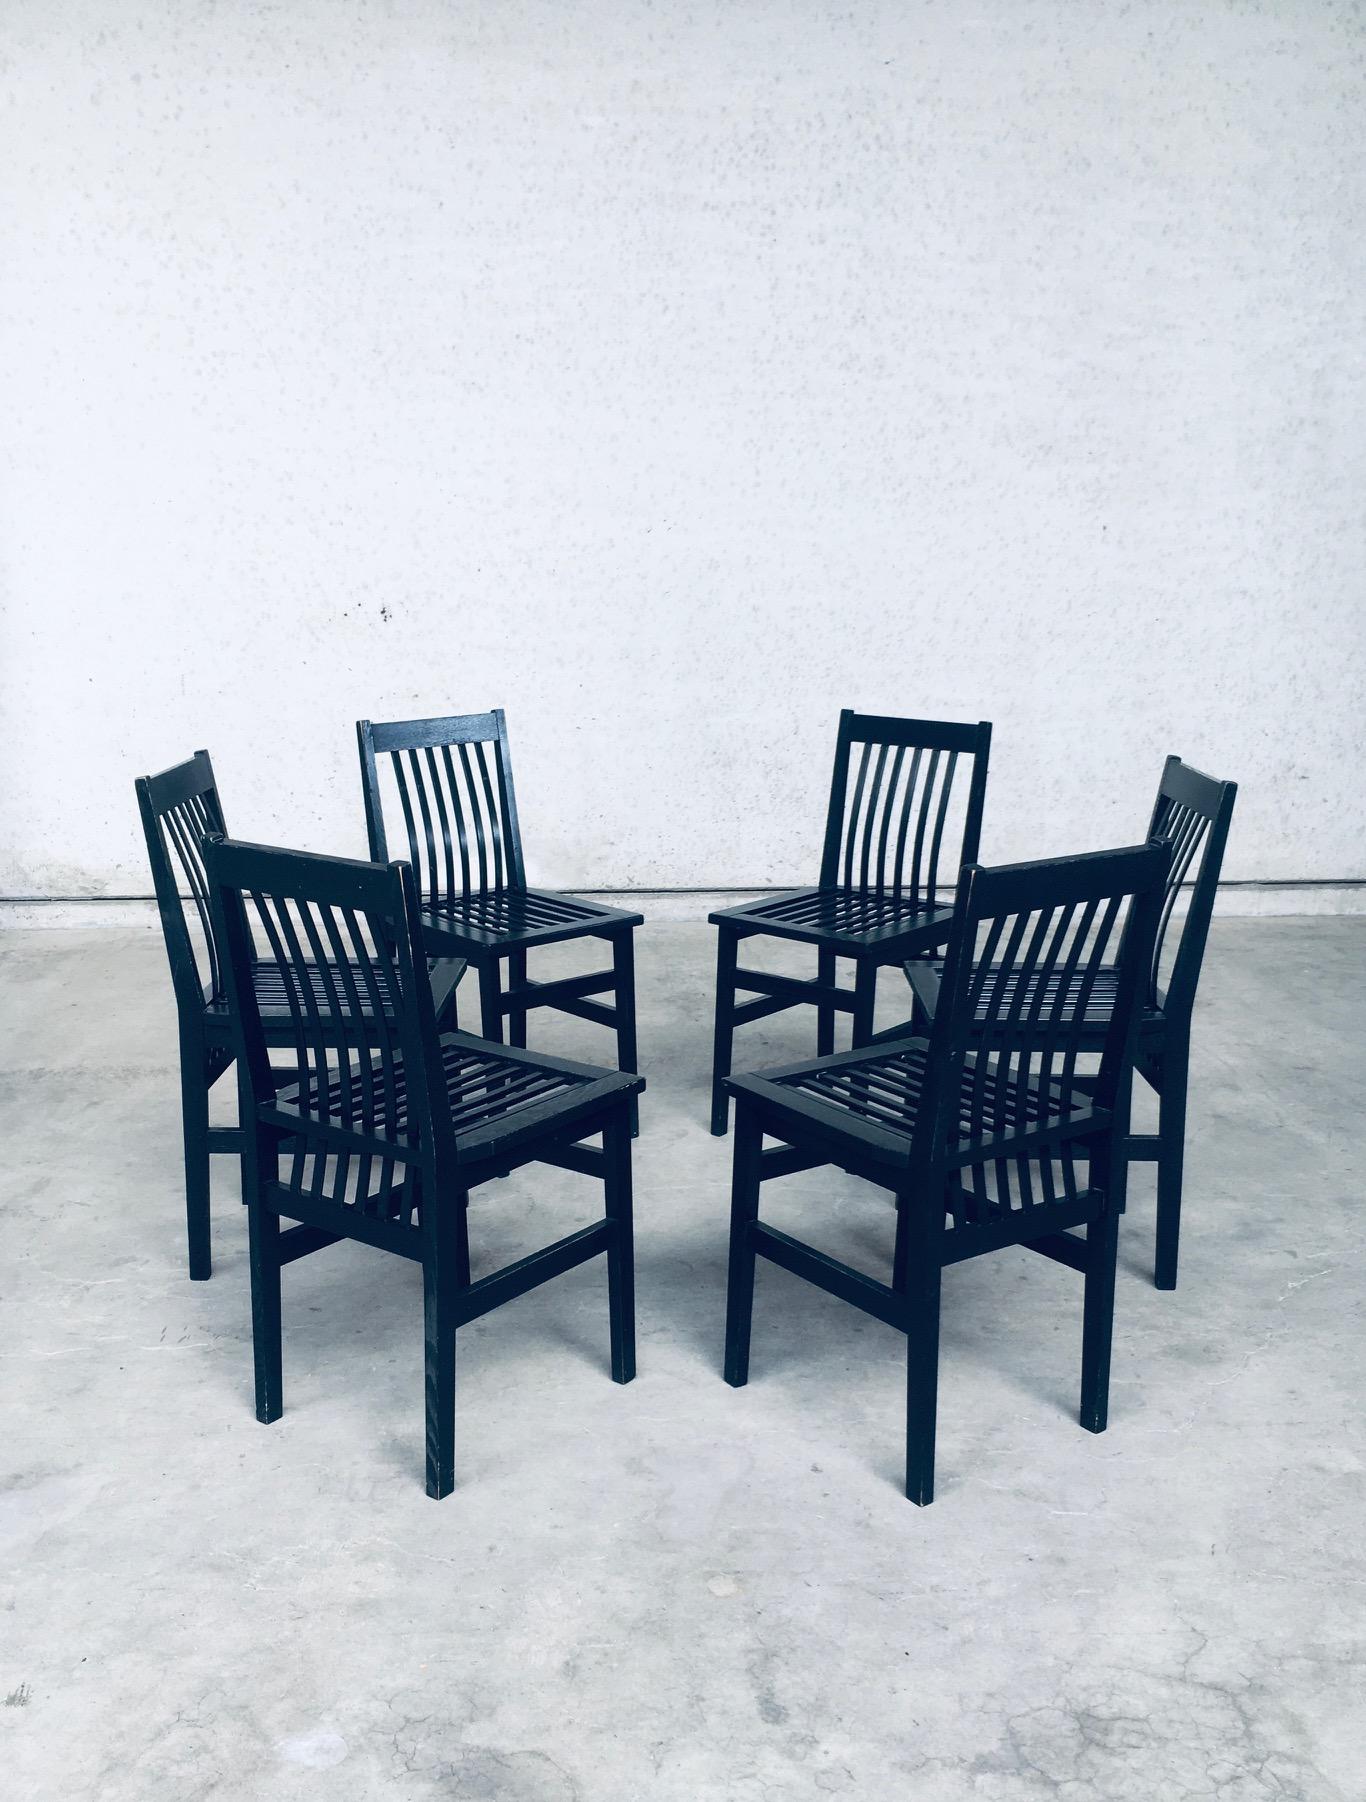 Wood 'Milano' Dining Chair Set by Aldo Rossi for Molteni, Italy, 1987